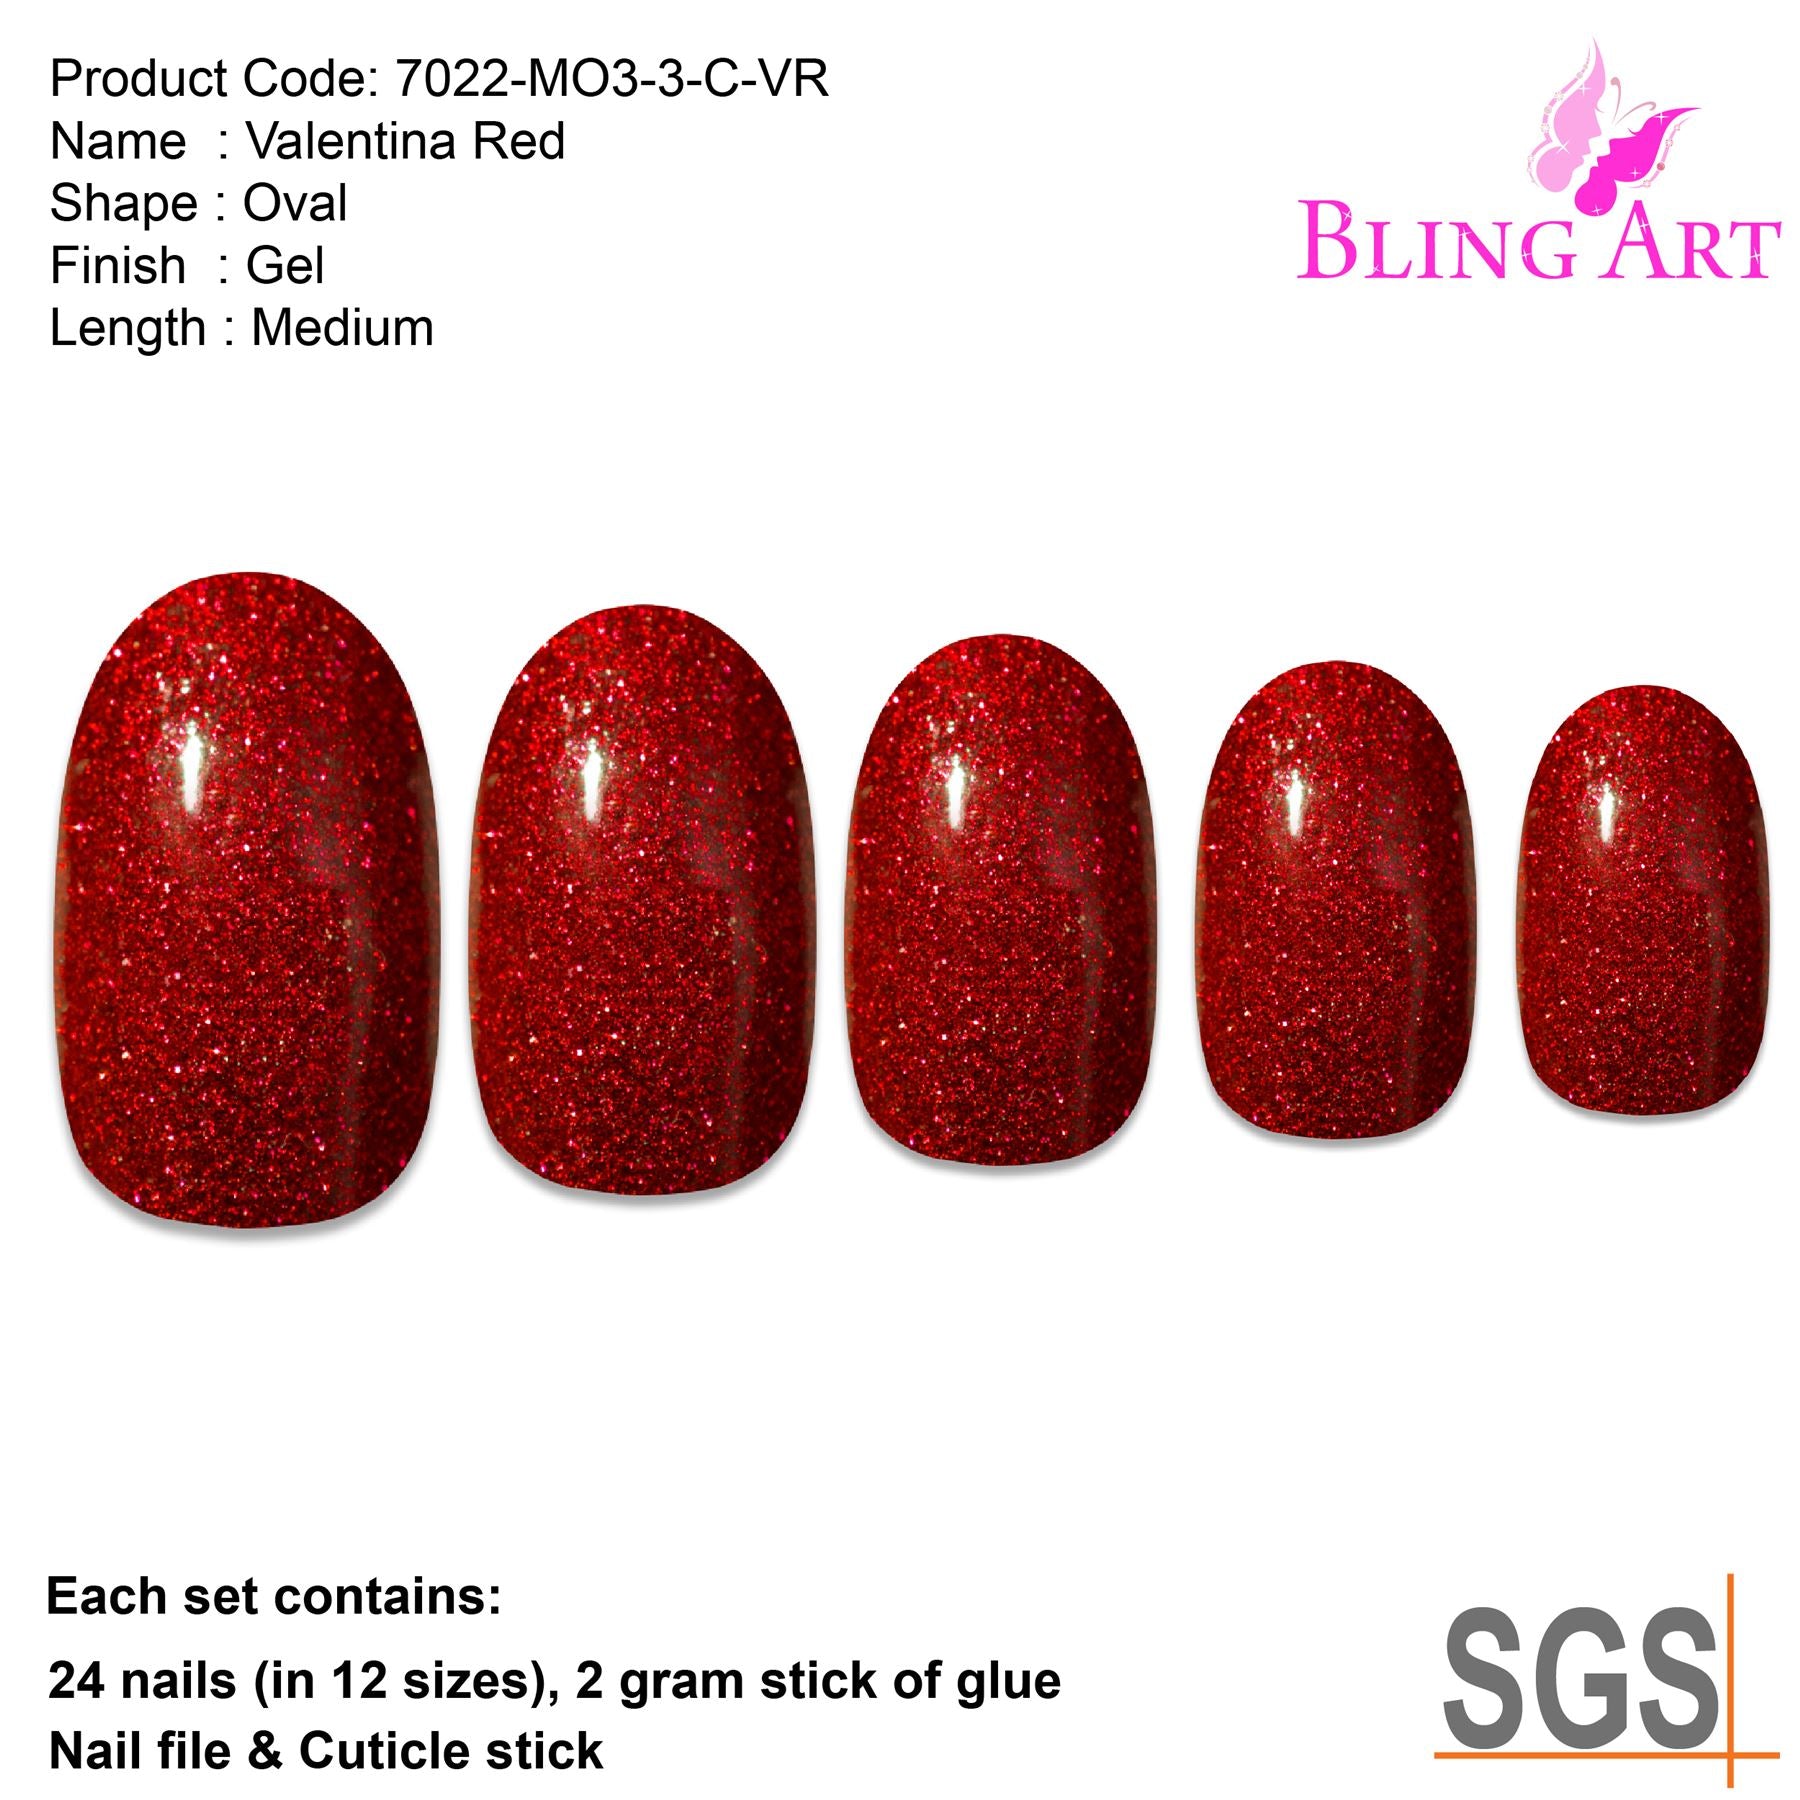 False Nails by Bling Art Red Gel Oval Medium Fake Acrylic 24 Tips with Glue